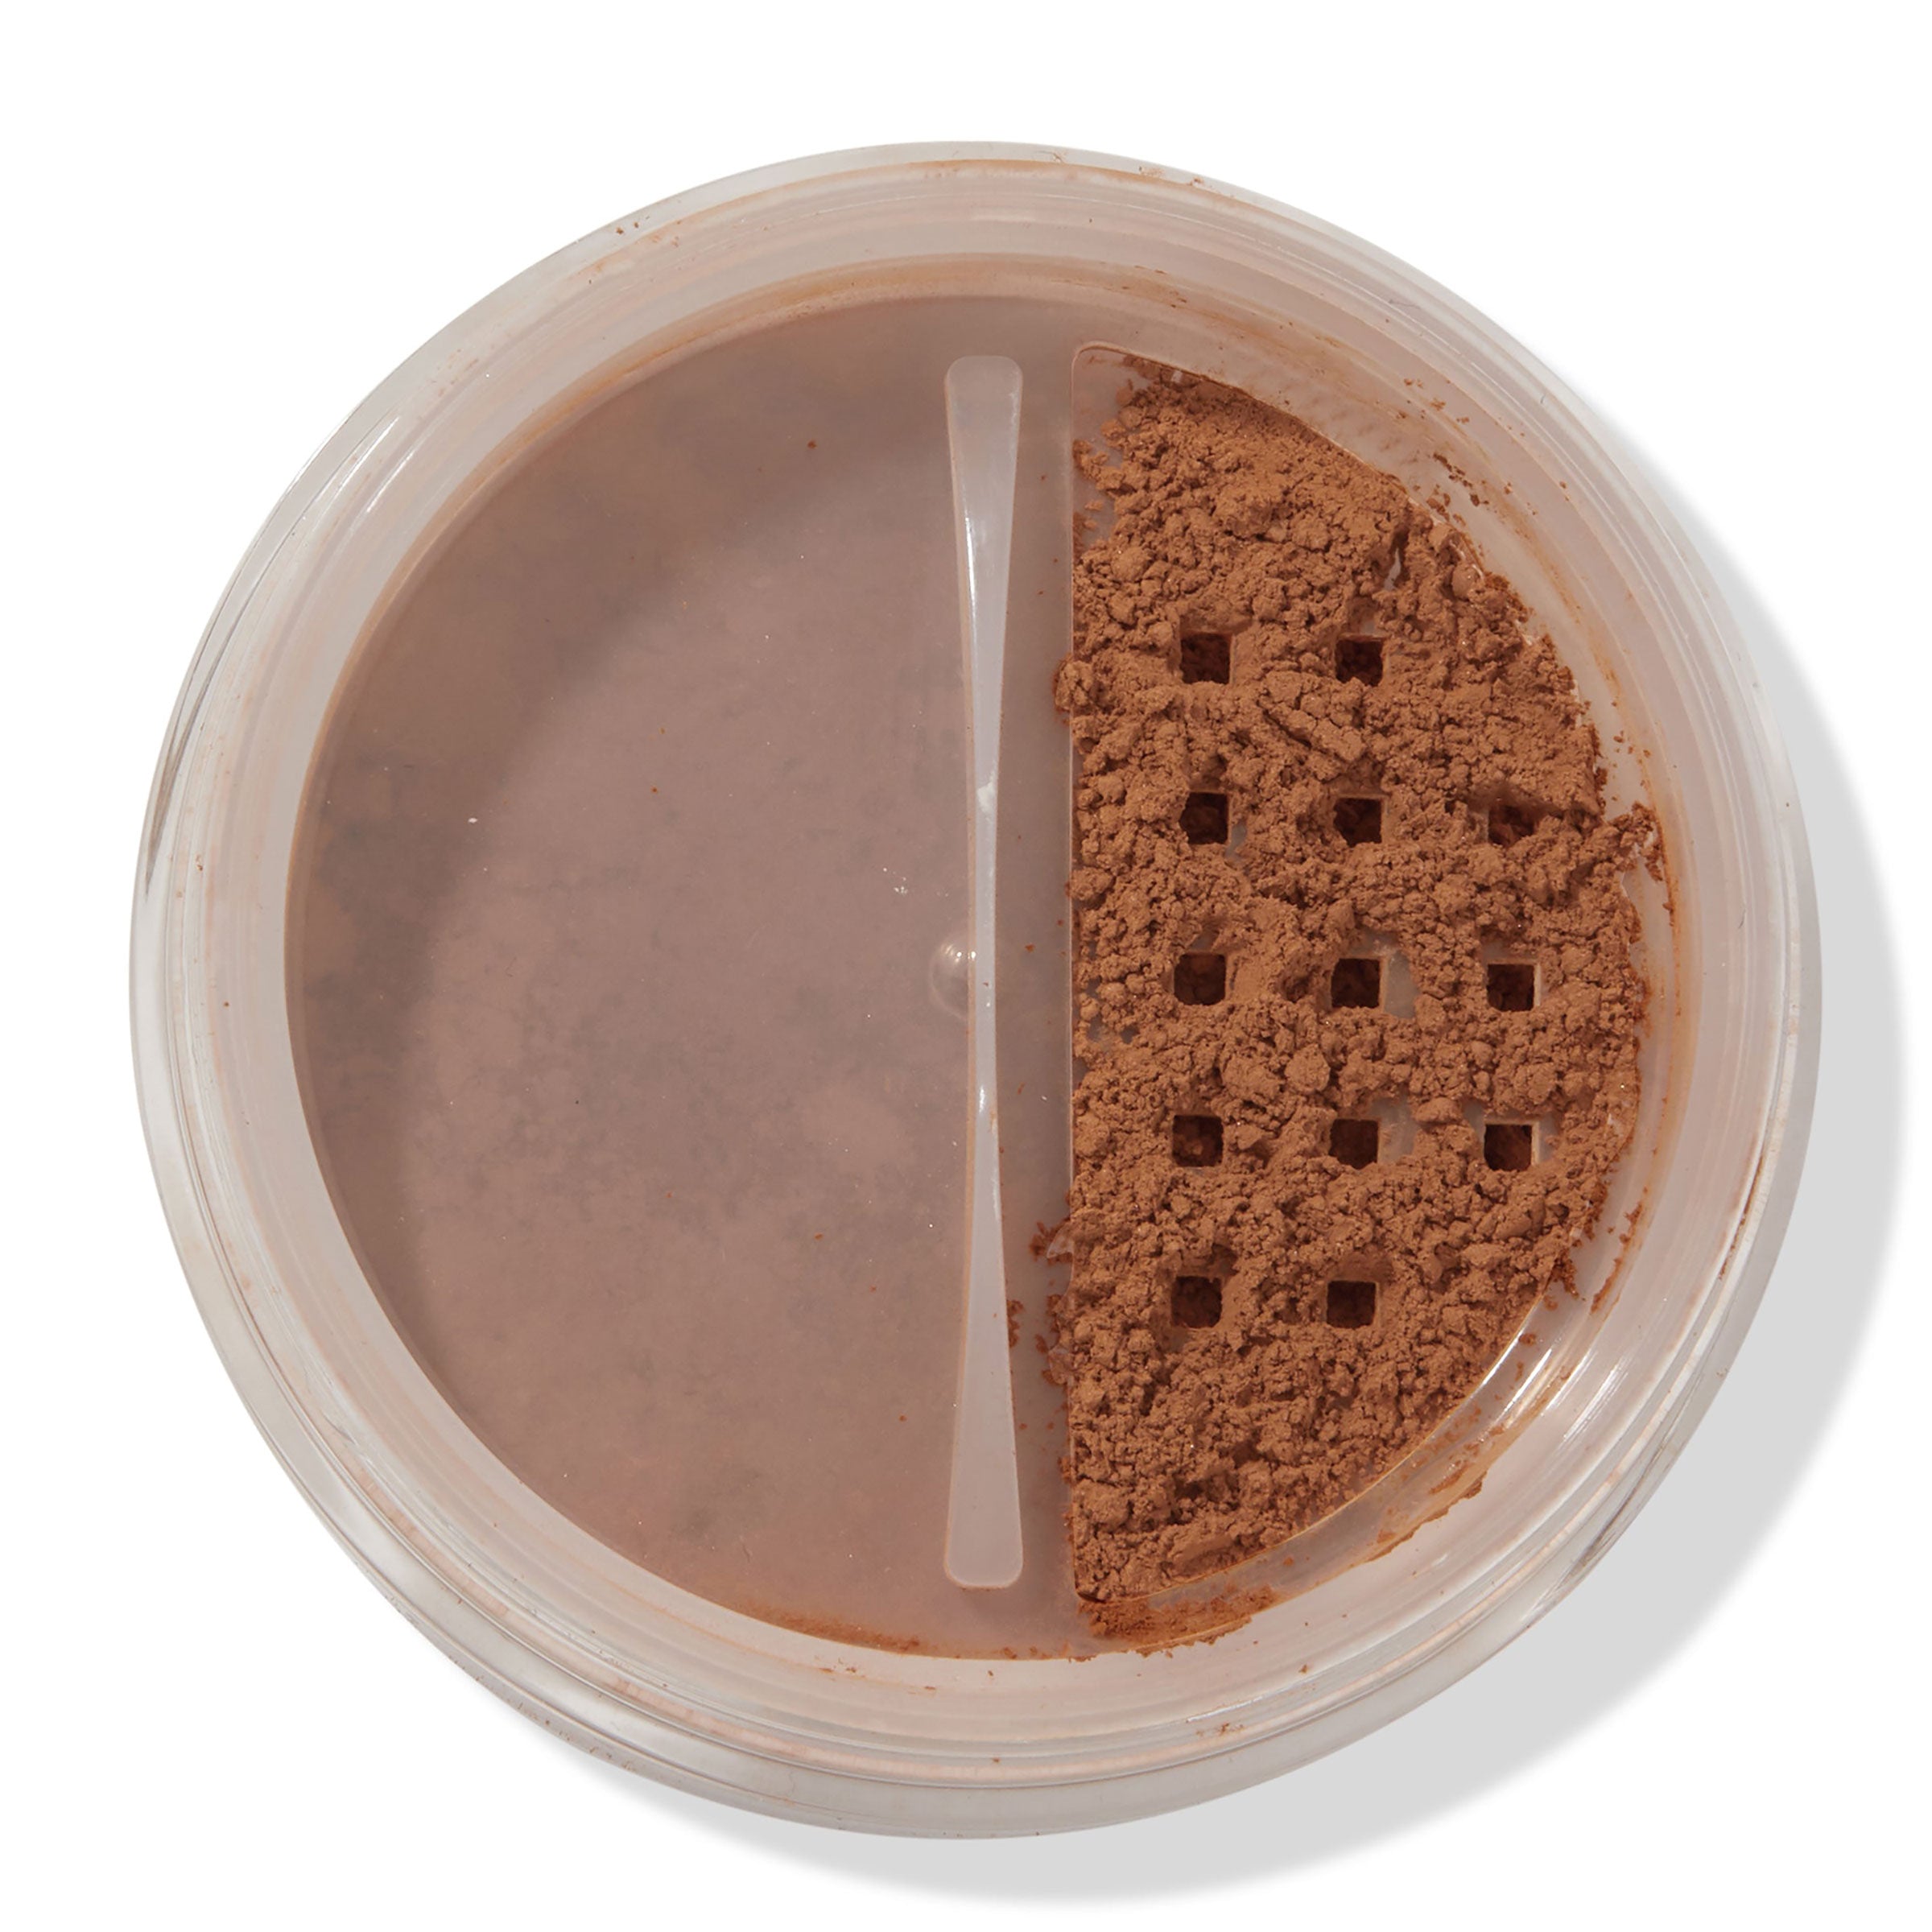 ColourPop Translucent Deep No Filter Weightless Loose Setting Powder for all day wear without feeling heavy or looking cakey. Recommended for fair, light, medium & medium dark skin tones